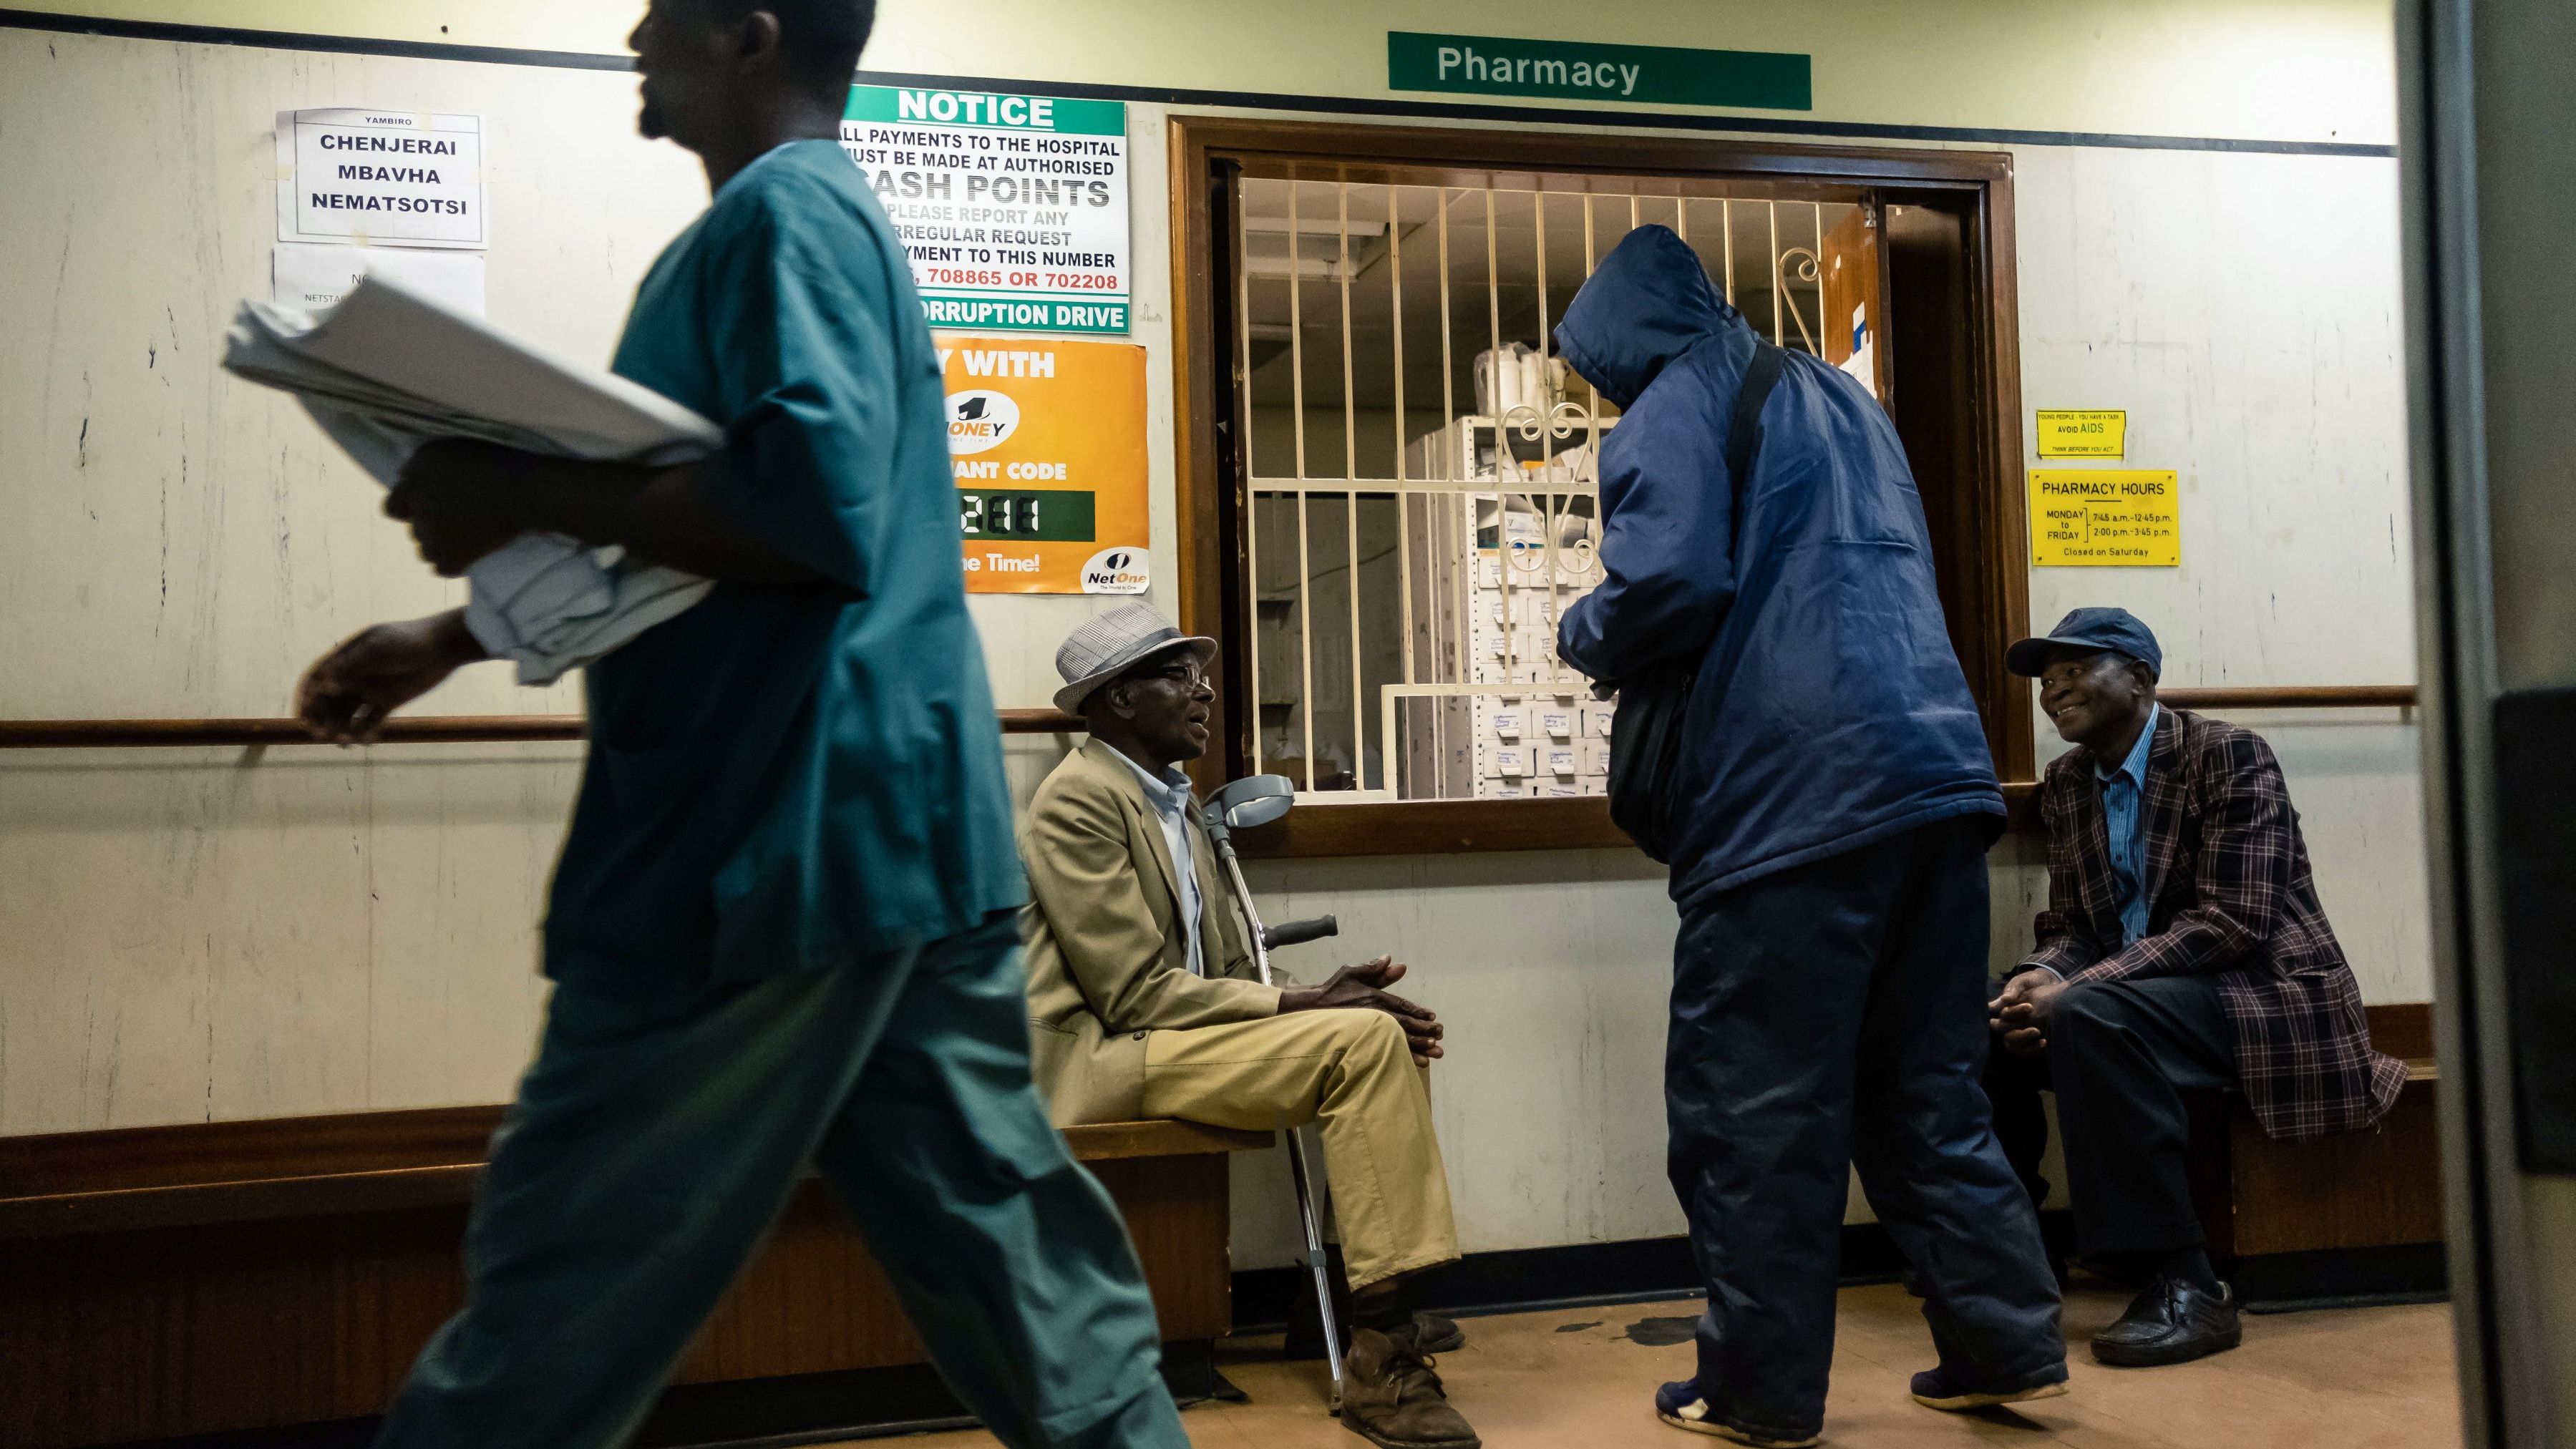 The strike could worsen the delivery of health services in Zimbabwe's public hospitals.